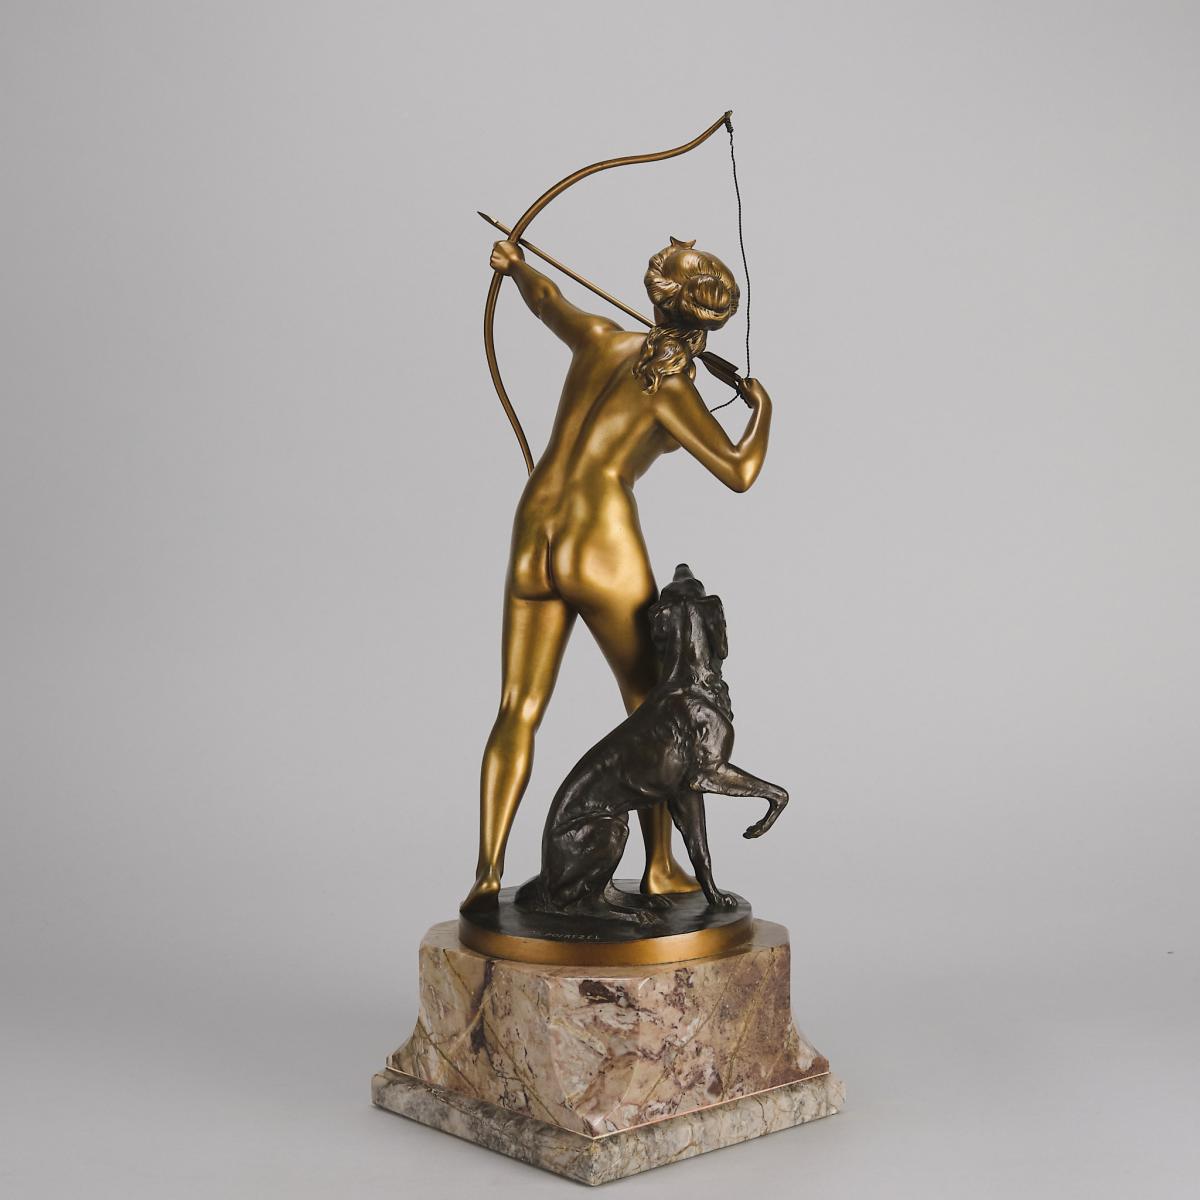 Cold-Painted Art Deco Bronze Sculpture entitled "Diana with Hounds" by Prof Poertzel